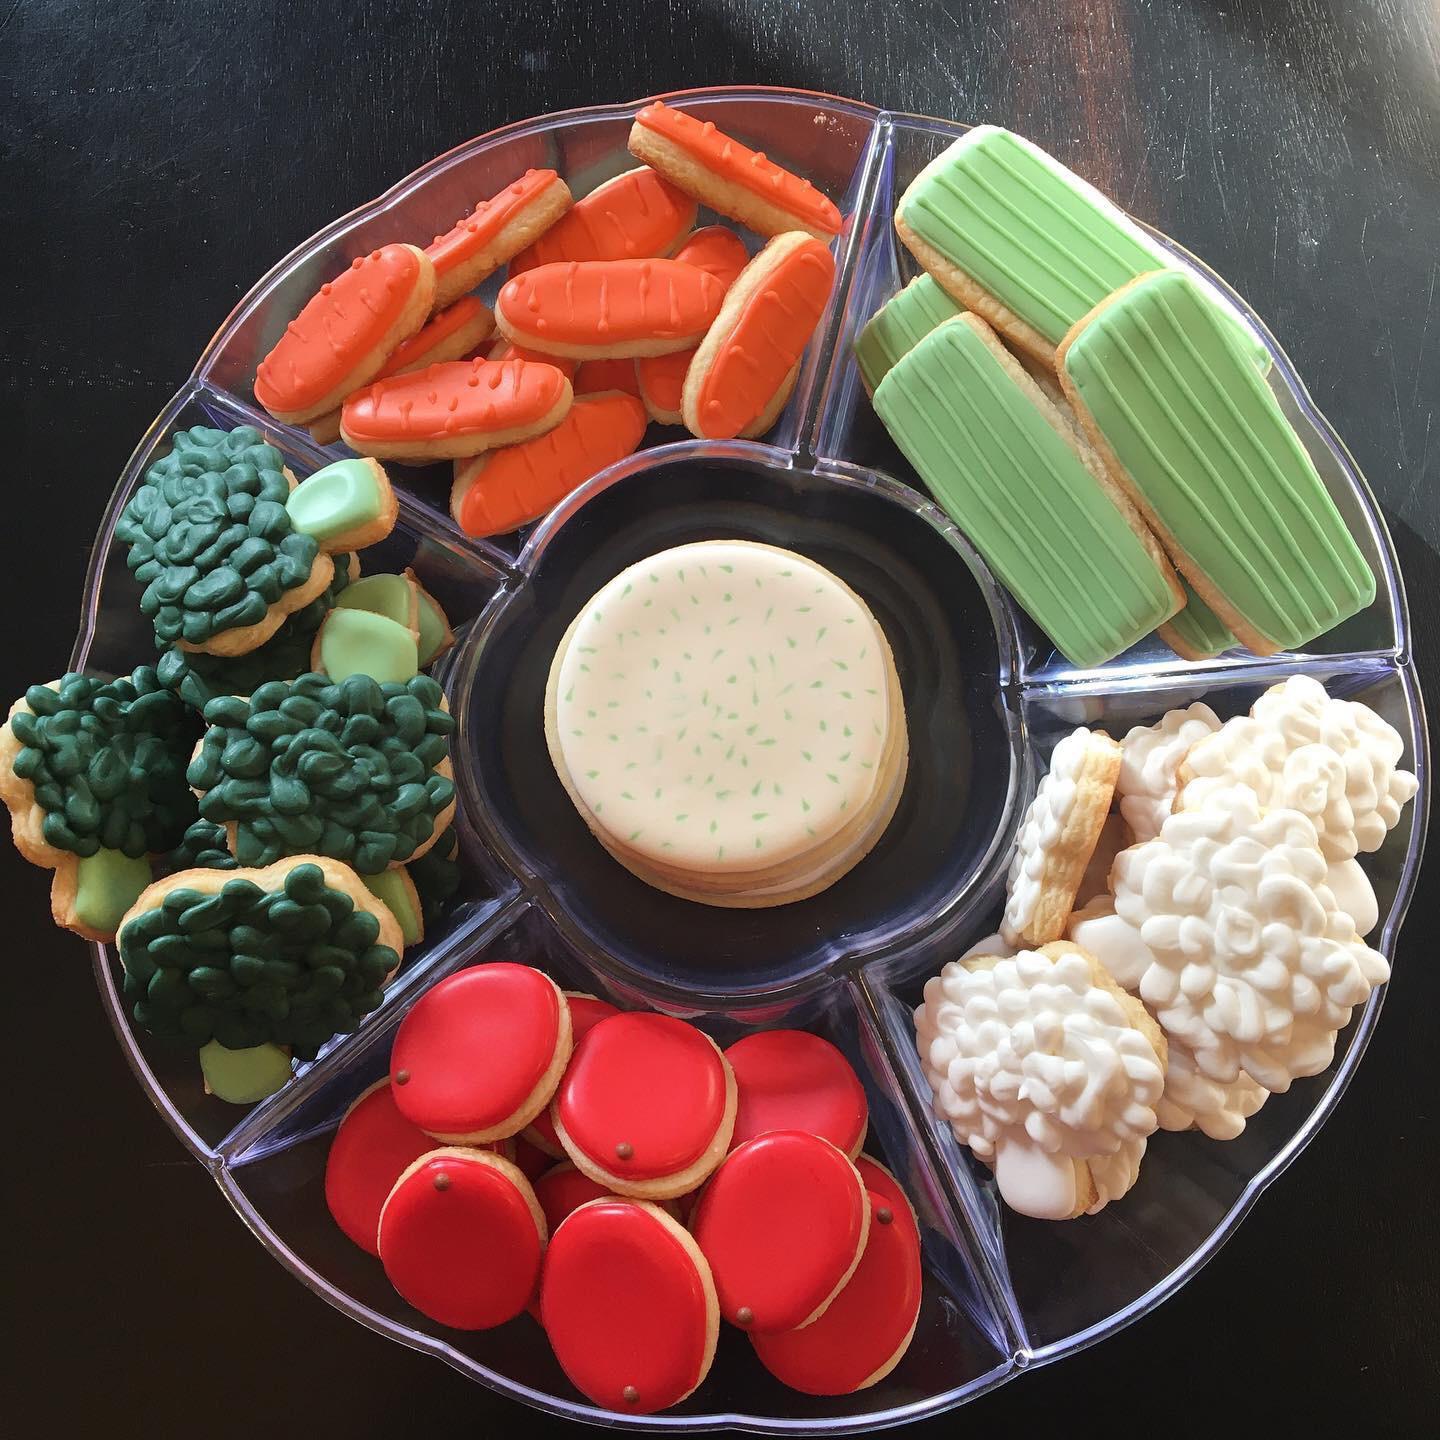 This veggie tray will ruin your New Years resolutions.